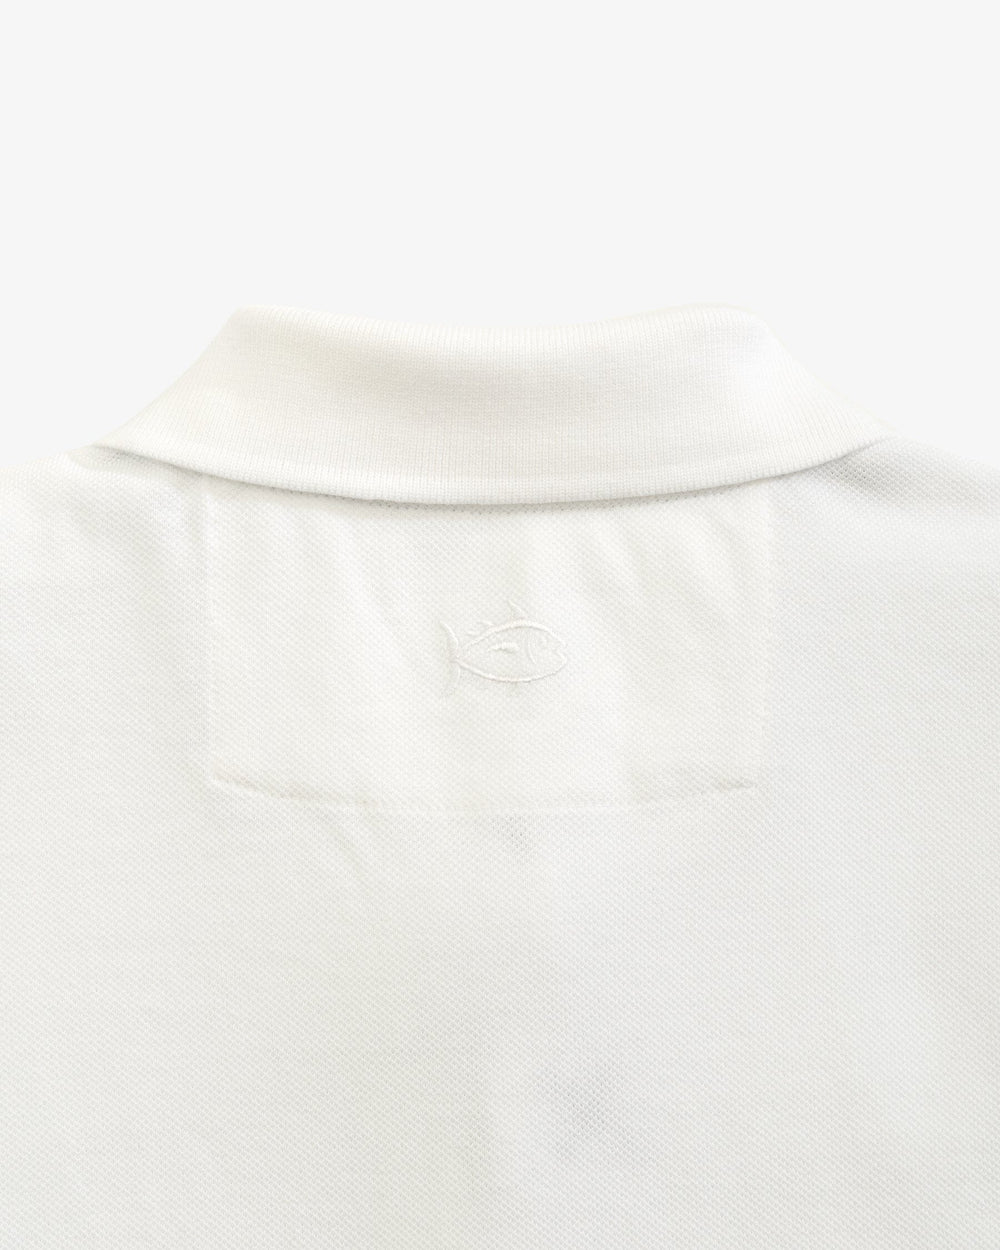 The yoke view of the Tennessee Volunteers Skipjack Polo by Southern Tide - Classic White